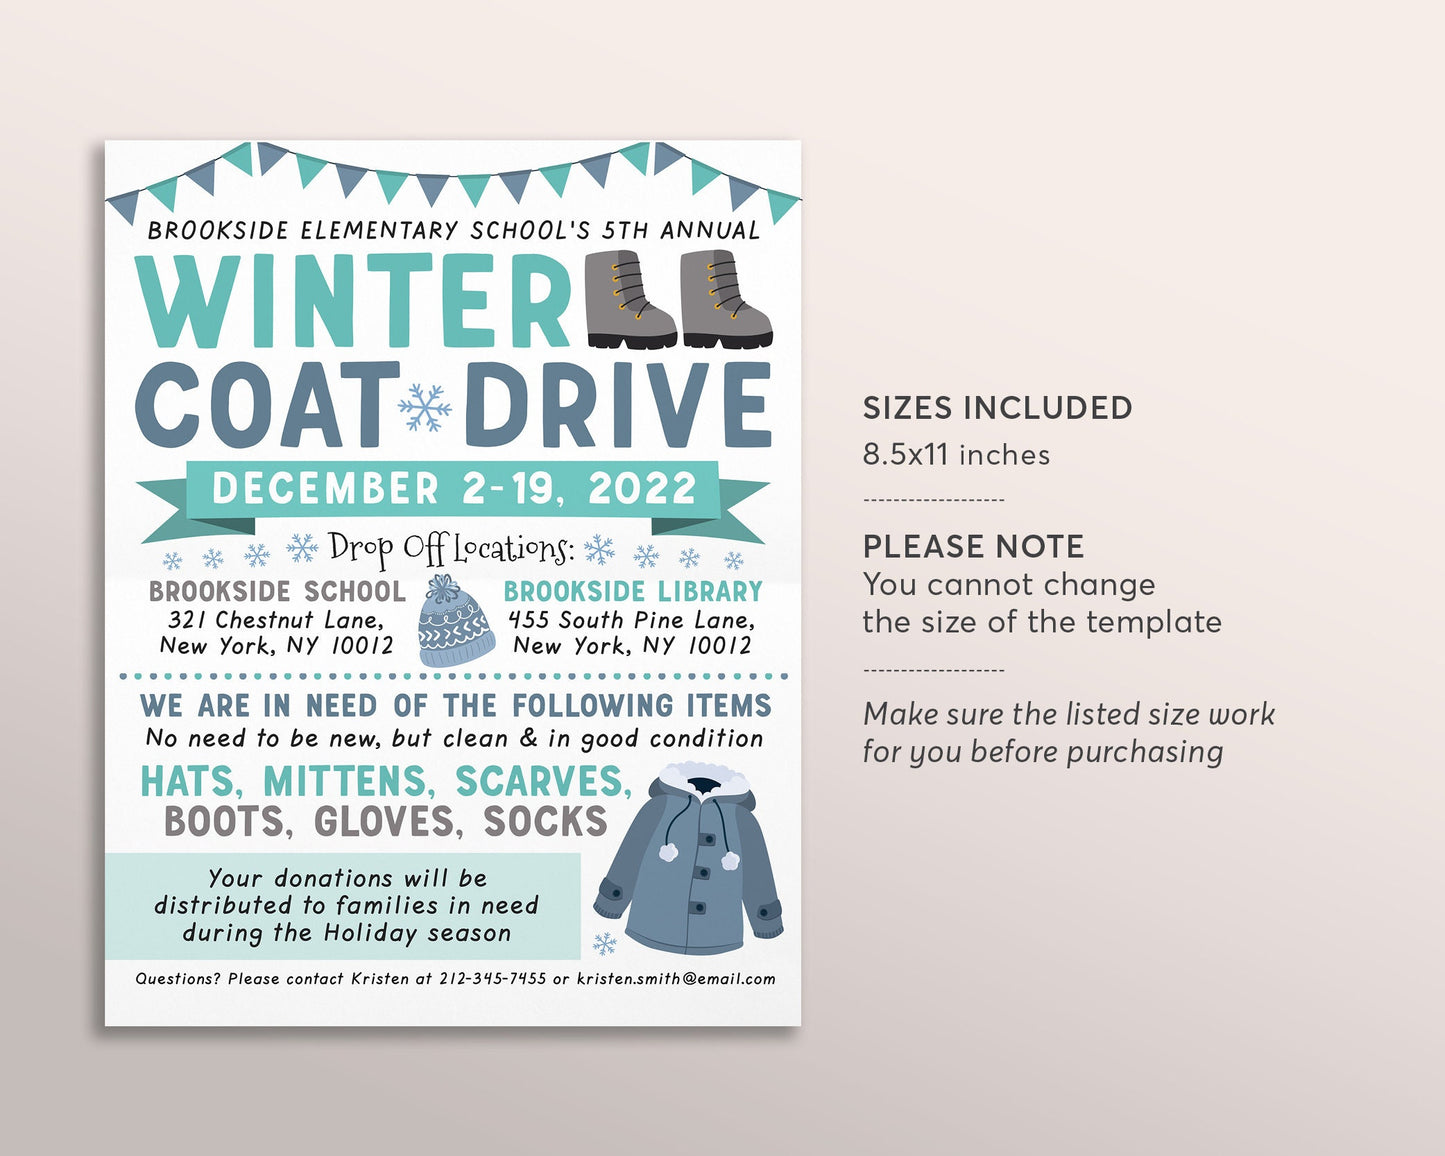 Winter Coat Drive Flyer Editable Template, Holiday Coat Drive Charity Church Fundraiser Printable PTA PTO, Christmas Coat And Warm Clothes